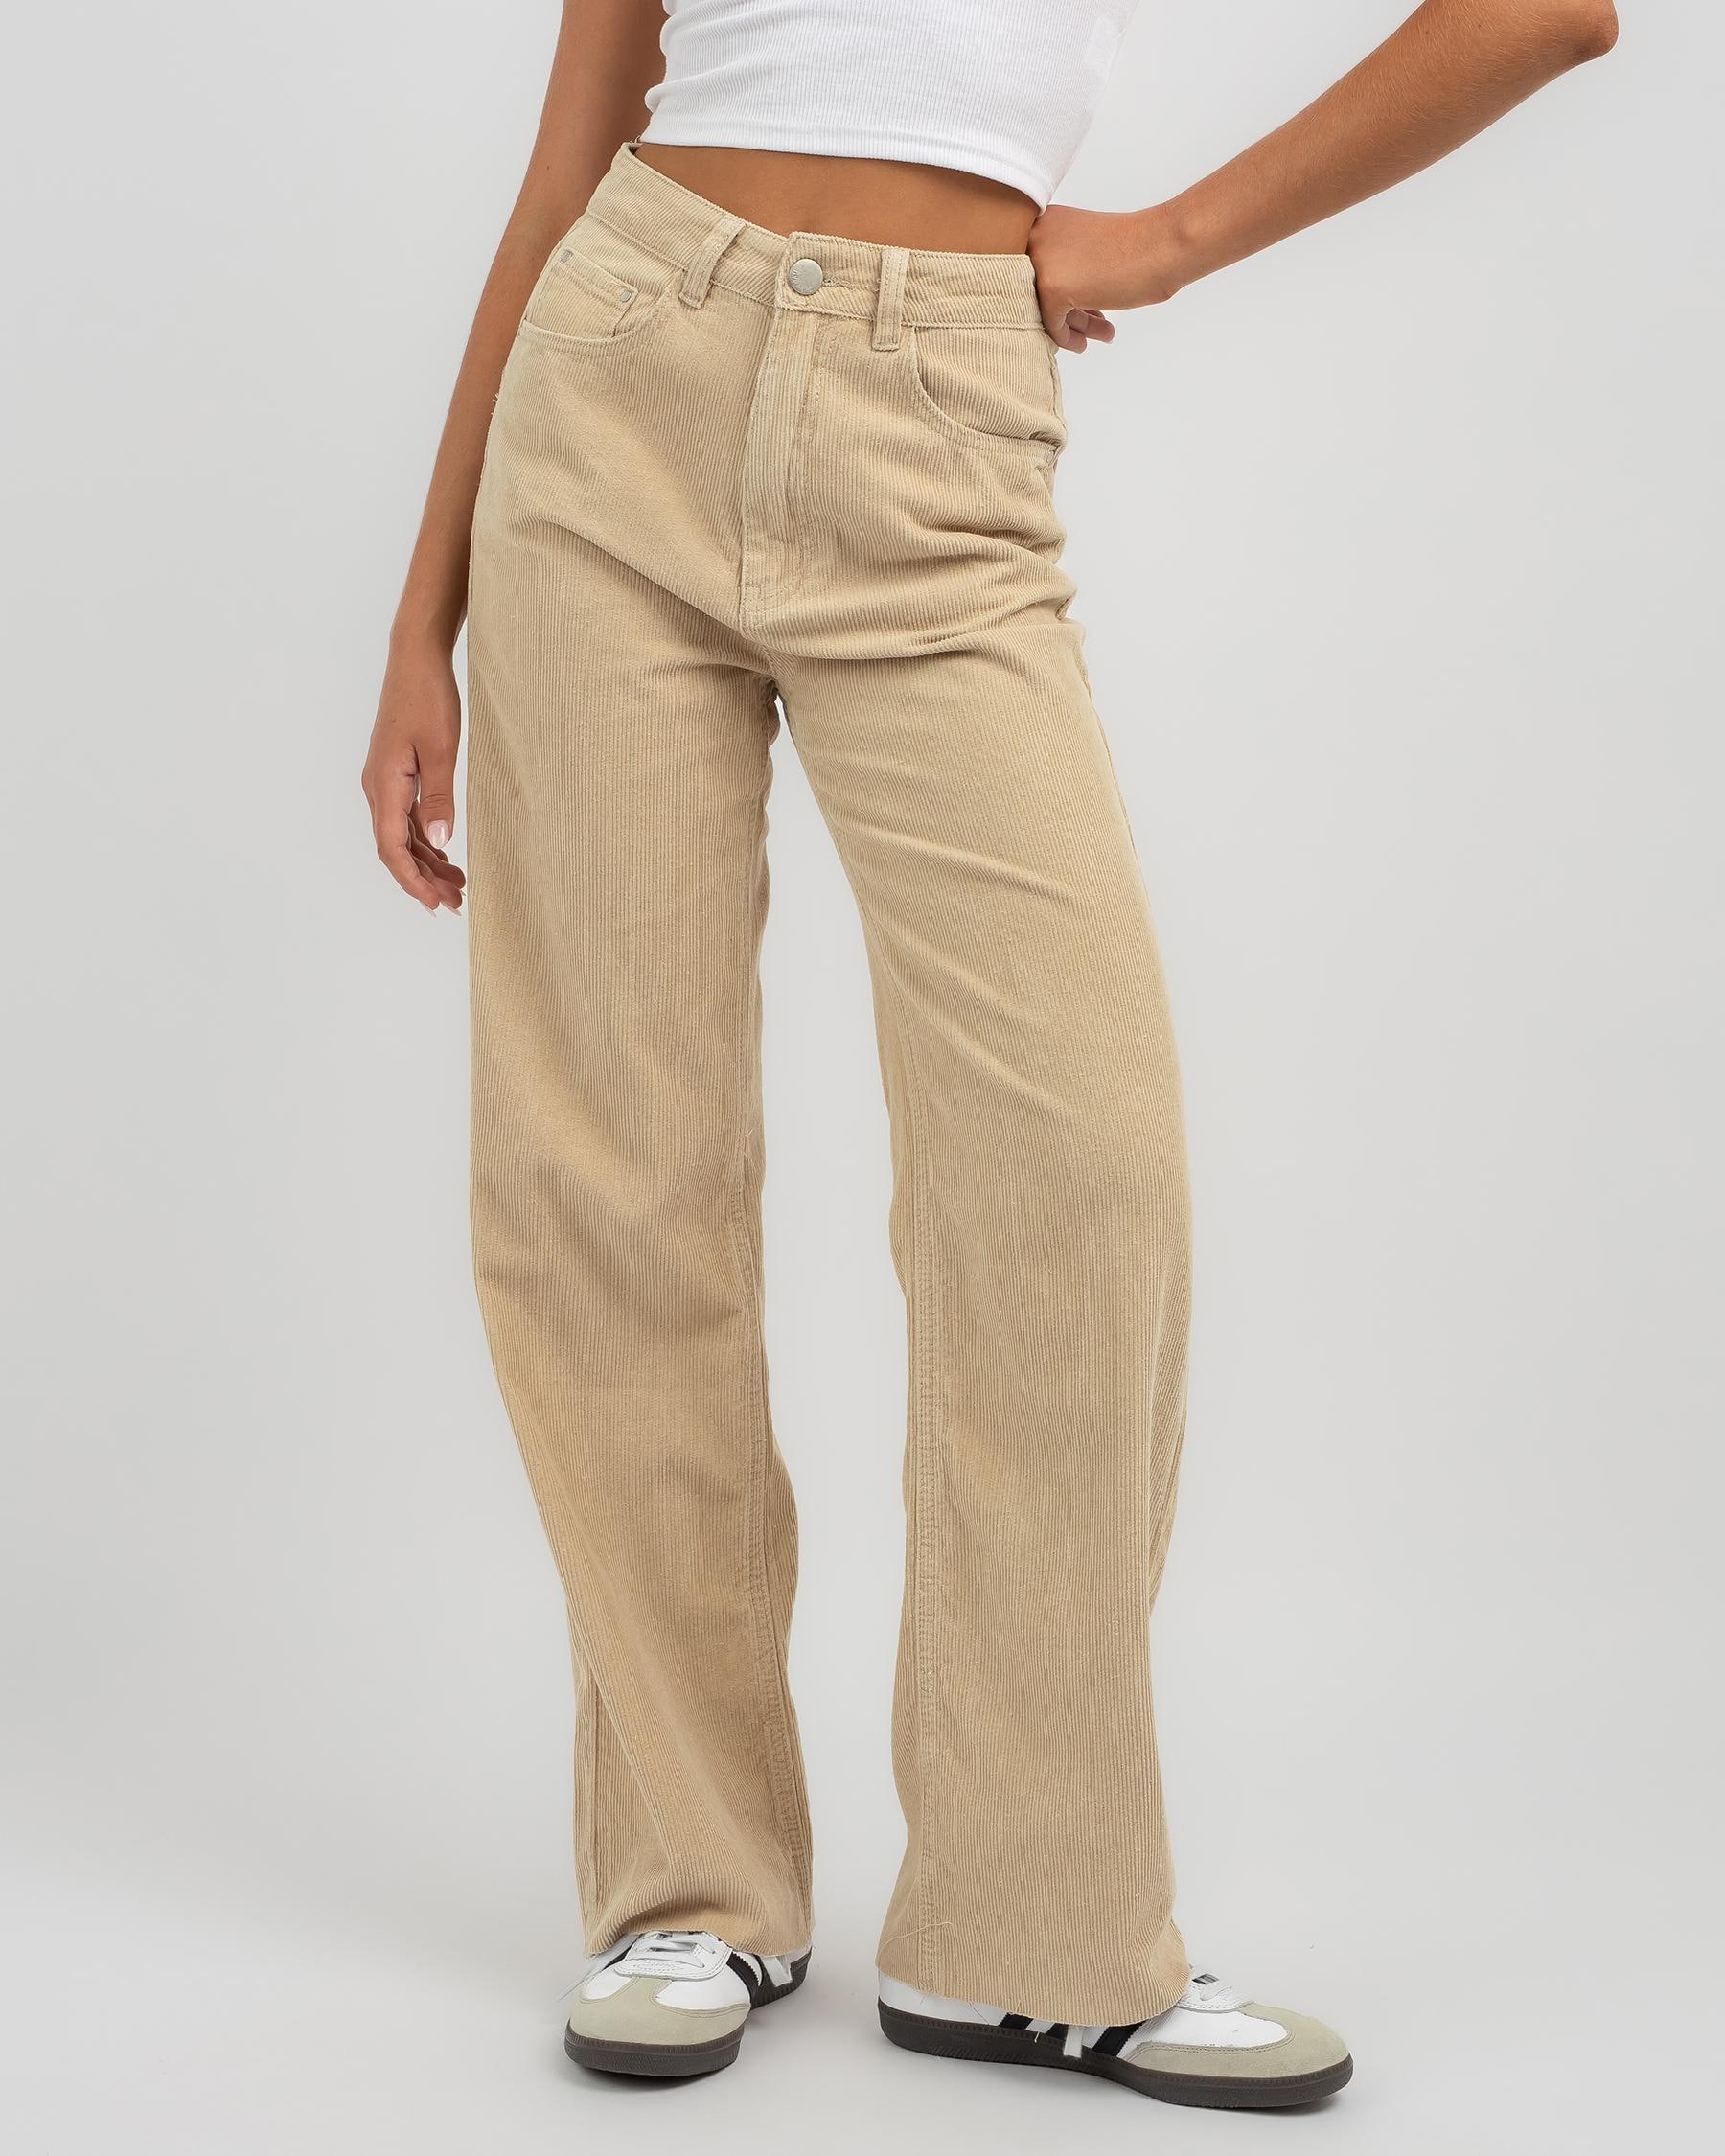 Shop Ava And Ever Ramona Pants In Beige - Fast Shipping & Easy Returns ...